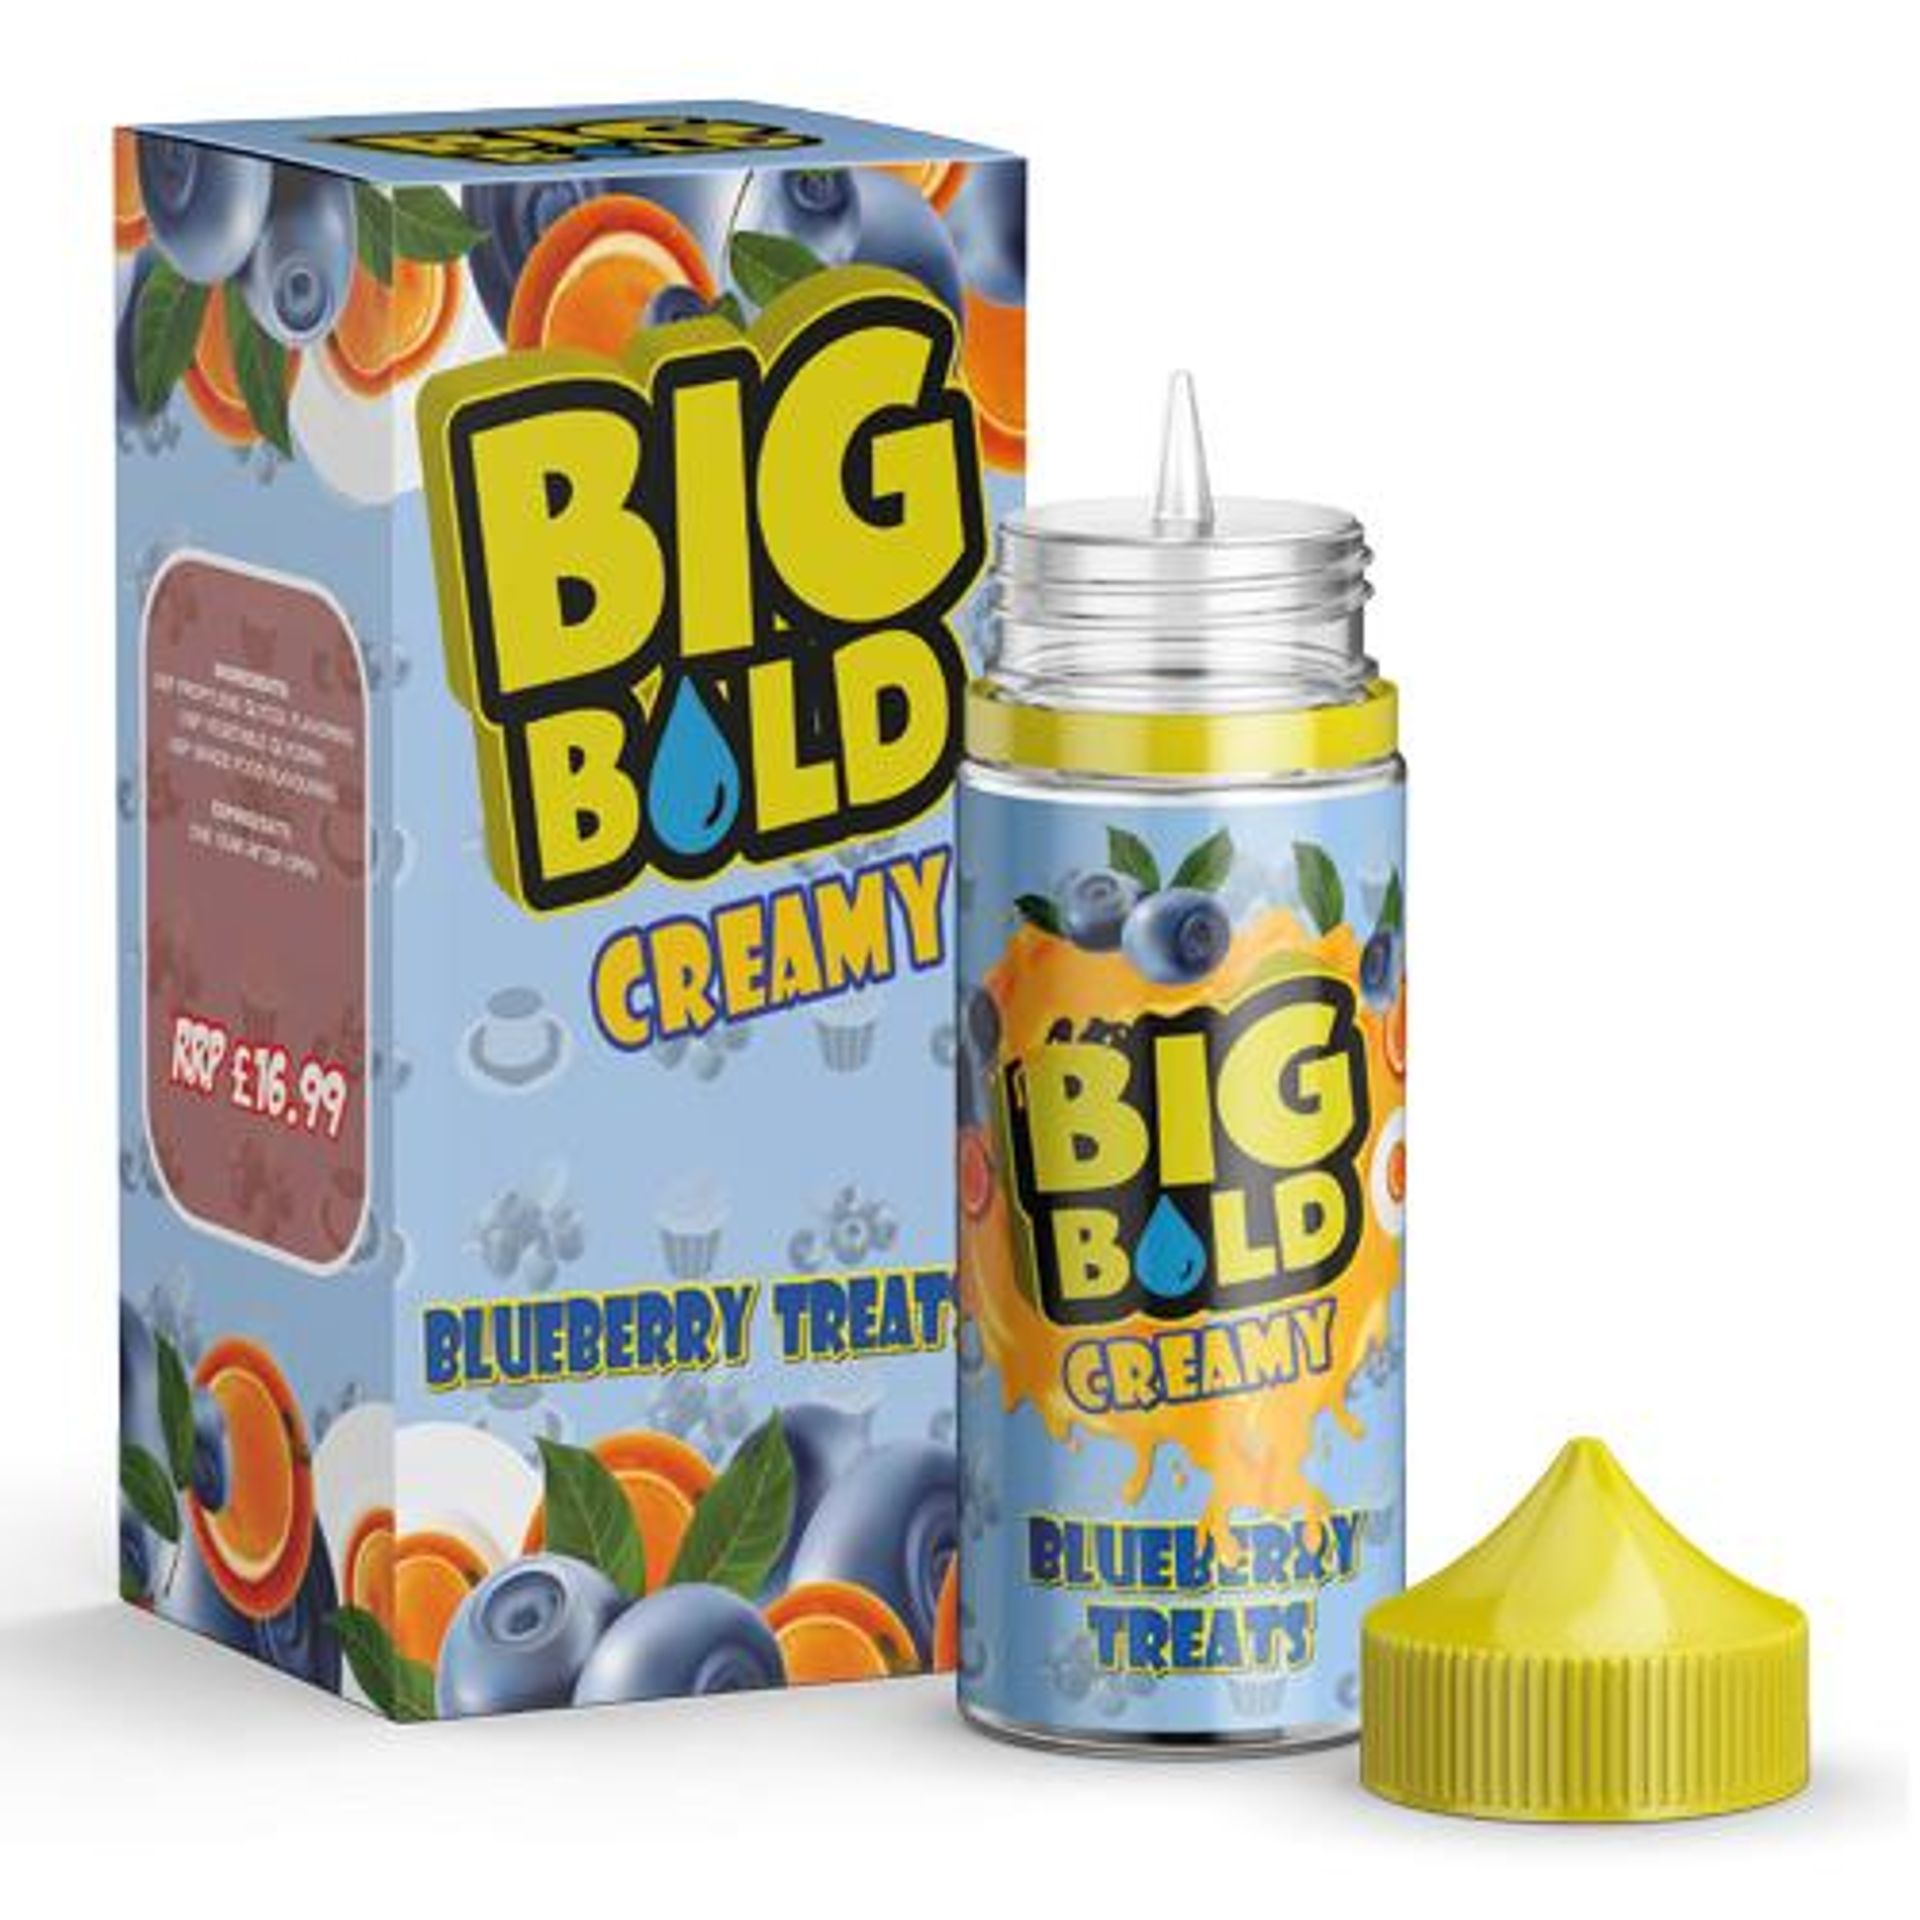 Image of Blueberry Treats by Big Bold